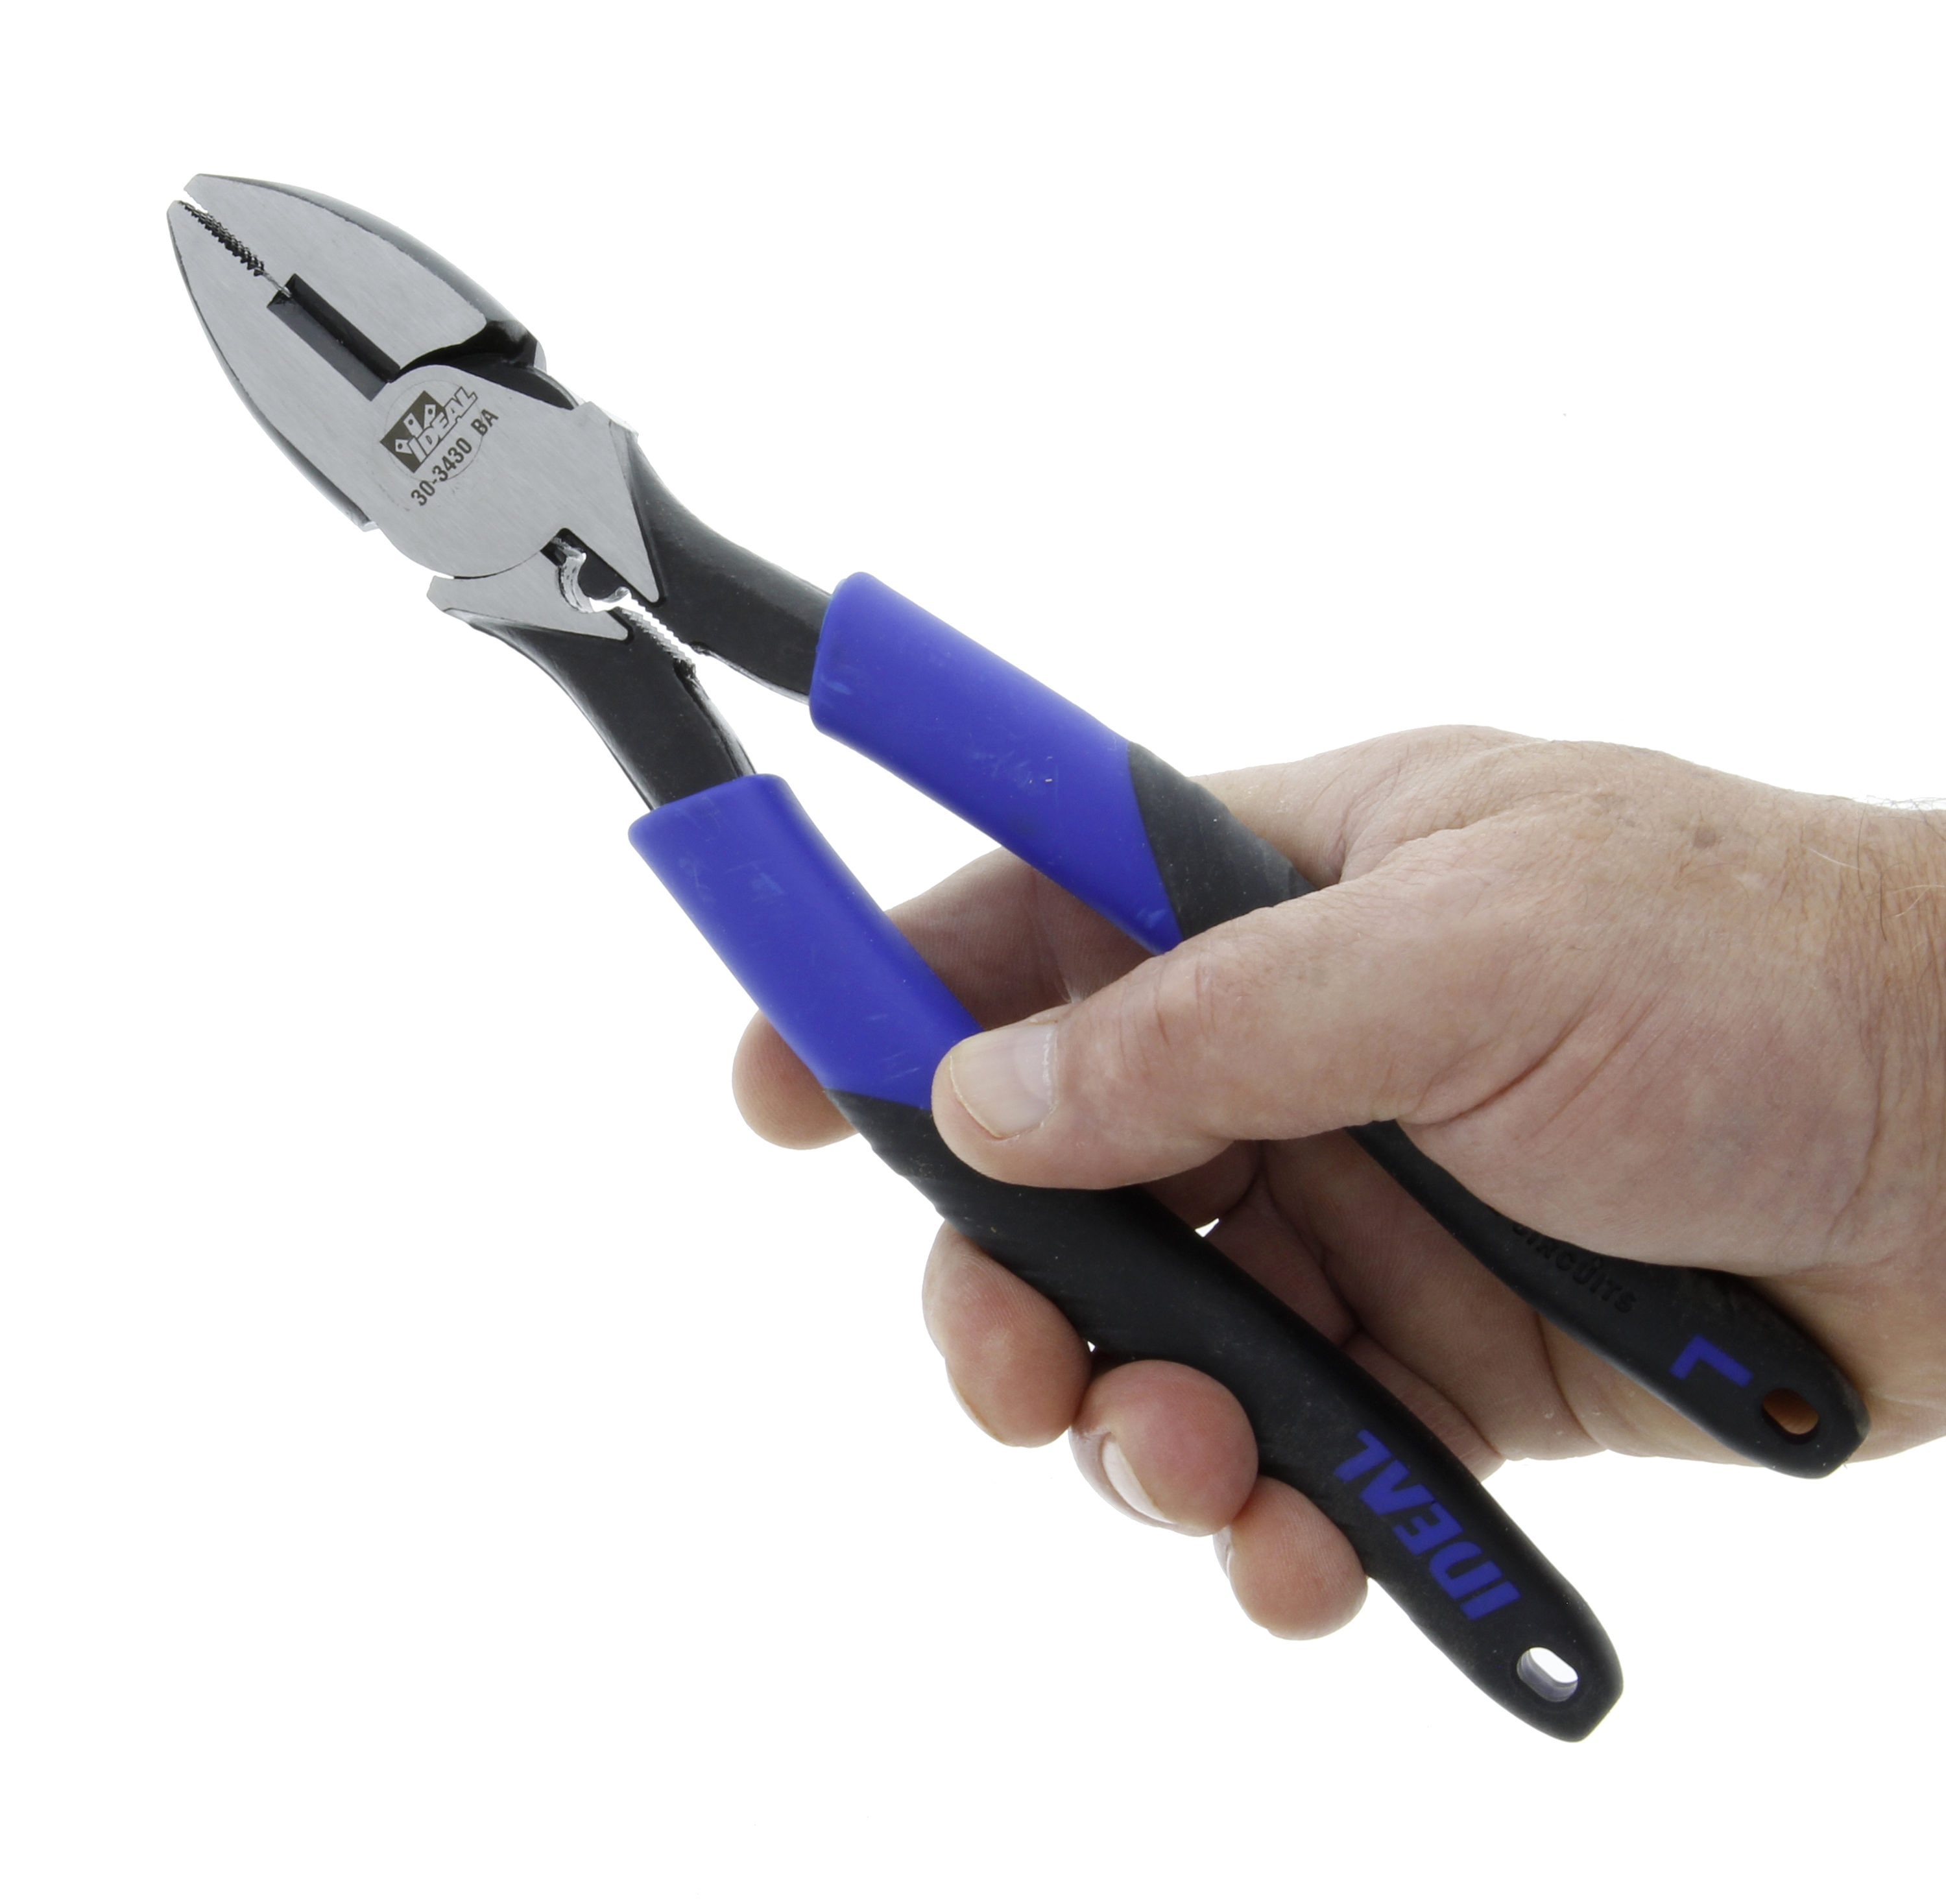 A cheap, portable, and effective line cutting tool perfect for any